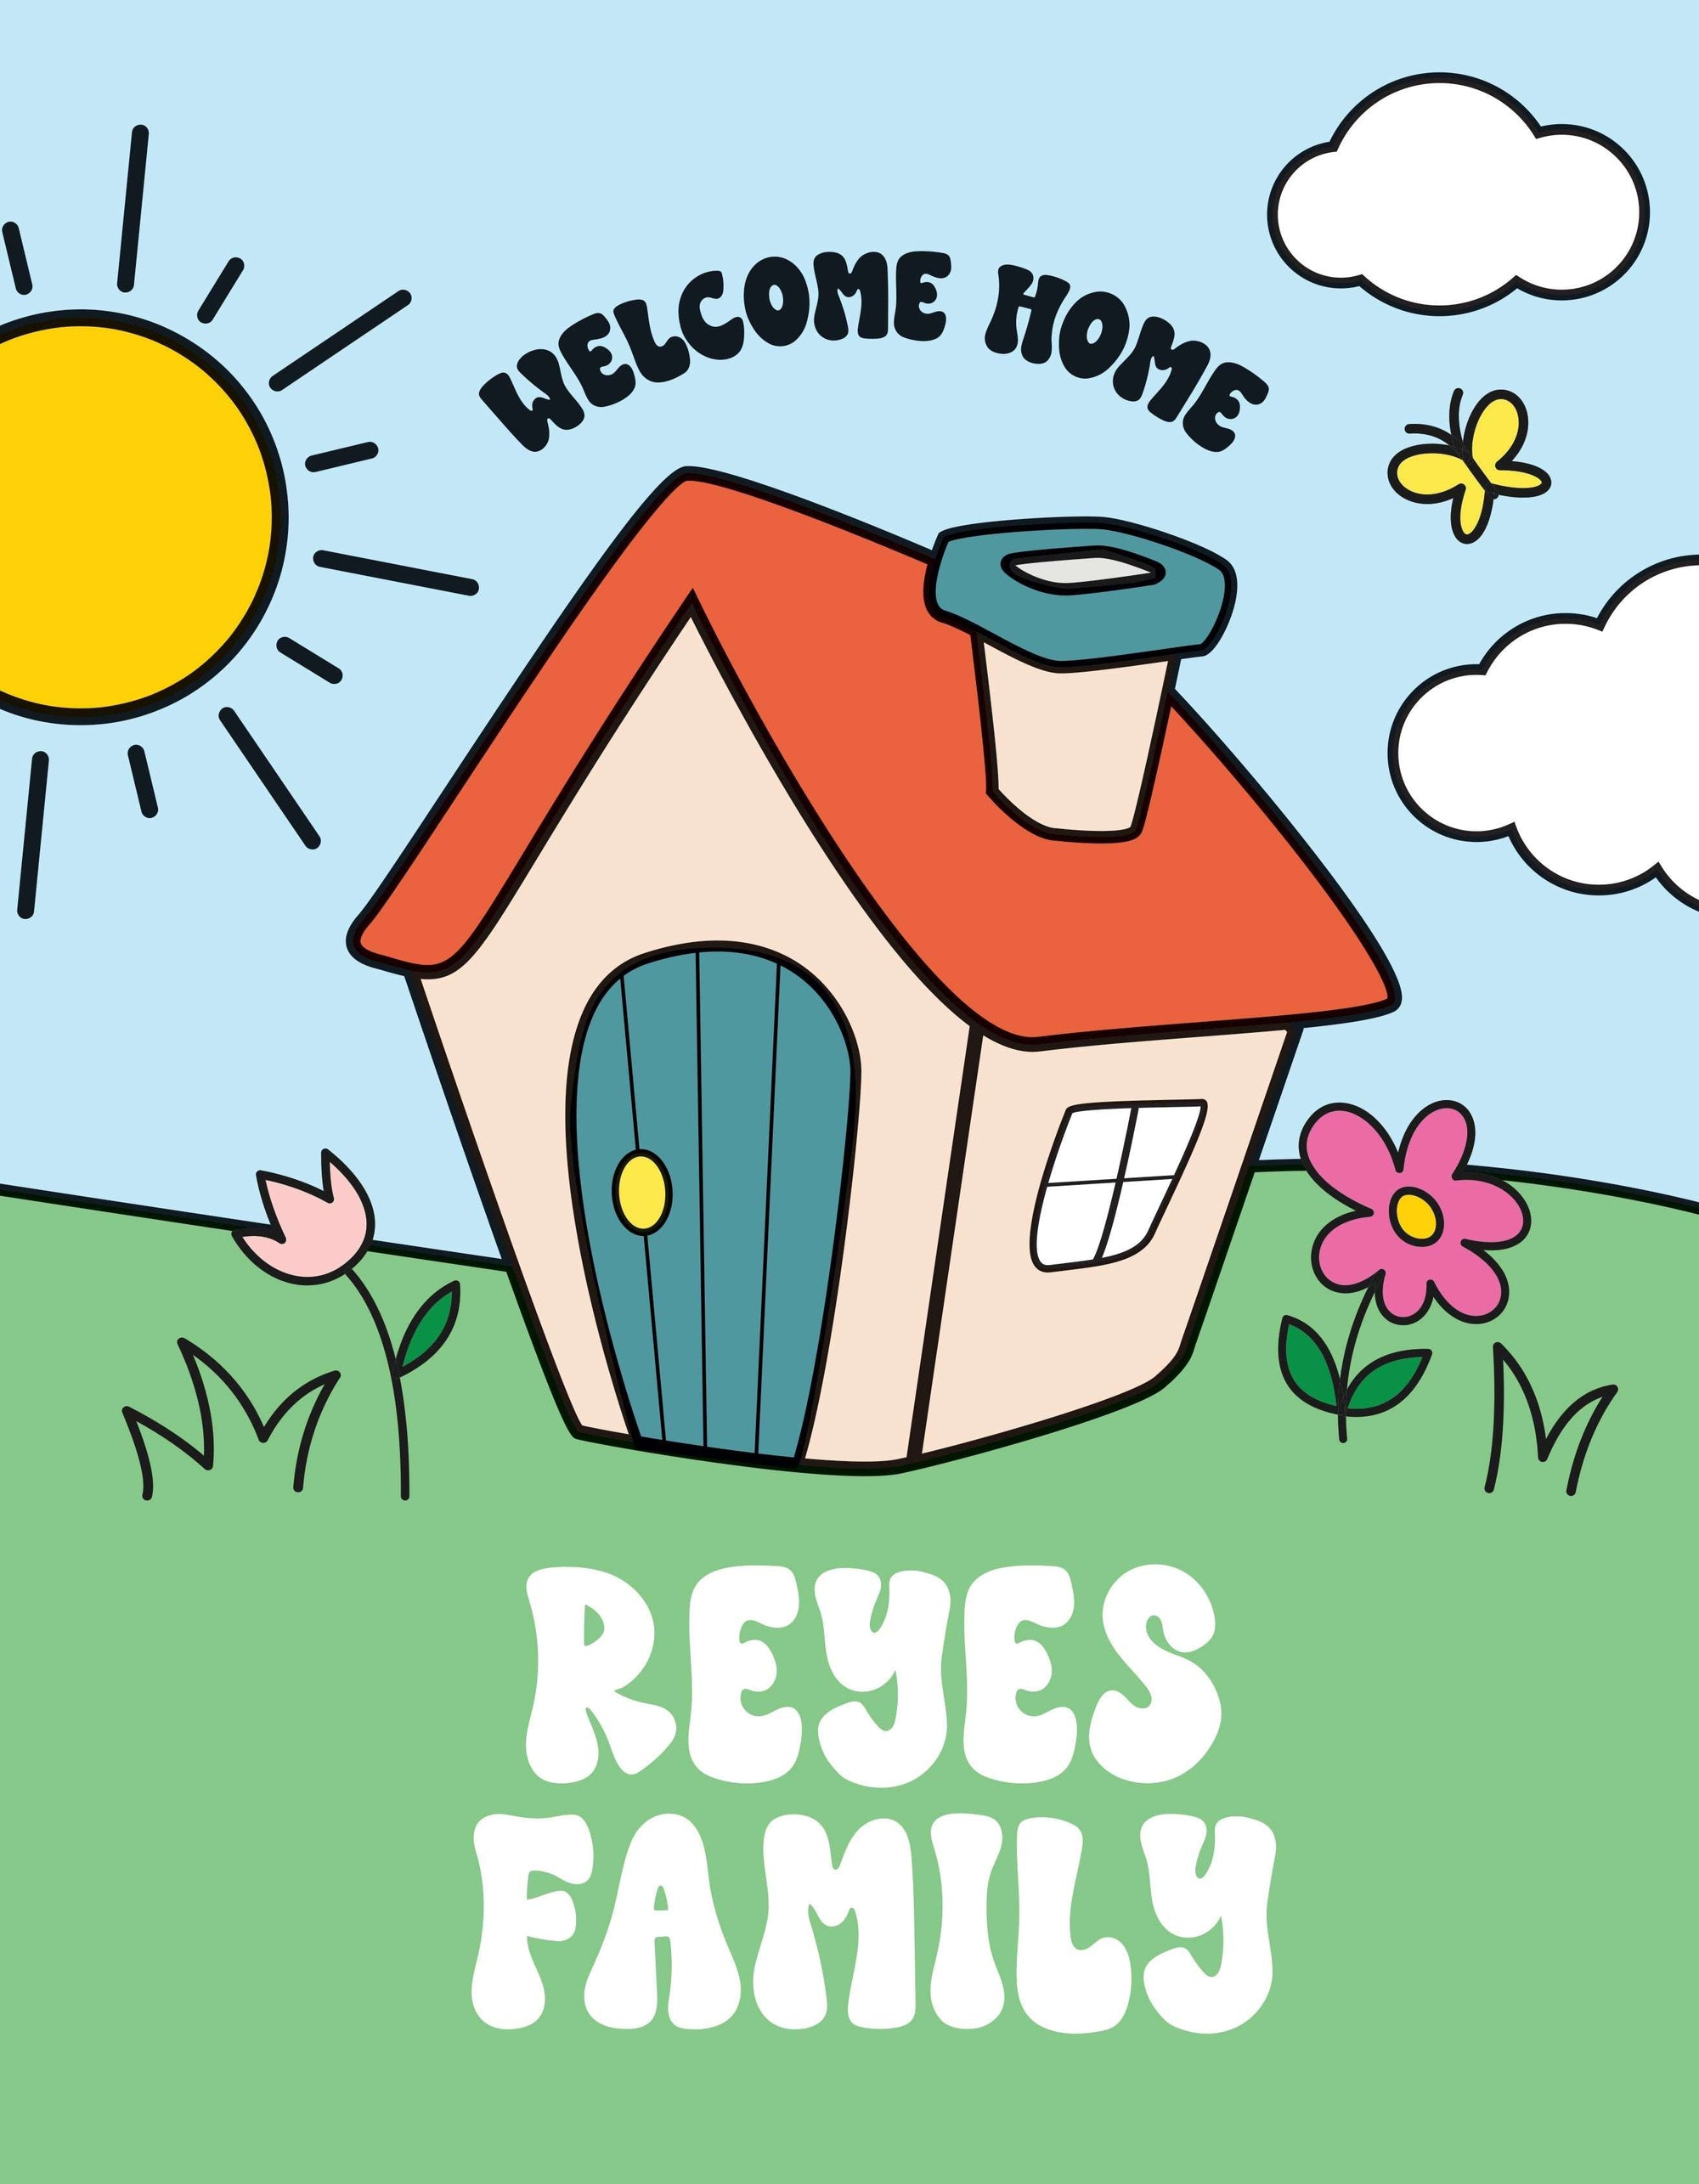 Realtor's Personalized coloring book Welcome Home Family Personalized Coloring Book